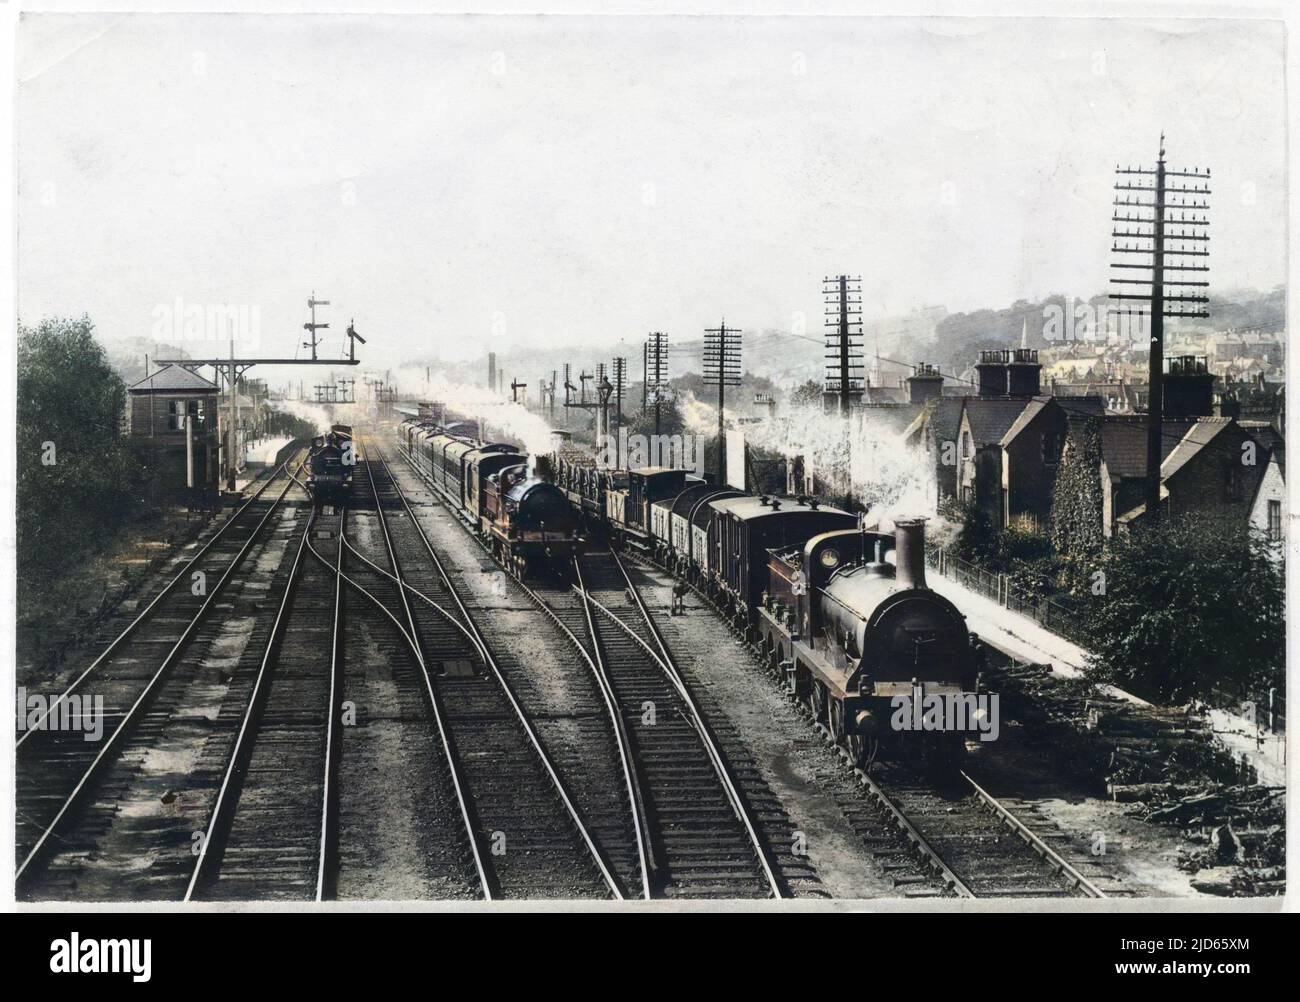 A goods train waits on one track to let the passenger train go through, while a third train approaches through the station at Redhill, Surrey. Colourised version of : 10003799       Date: 1909 Stock Photo